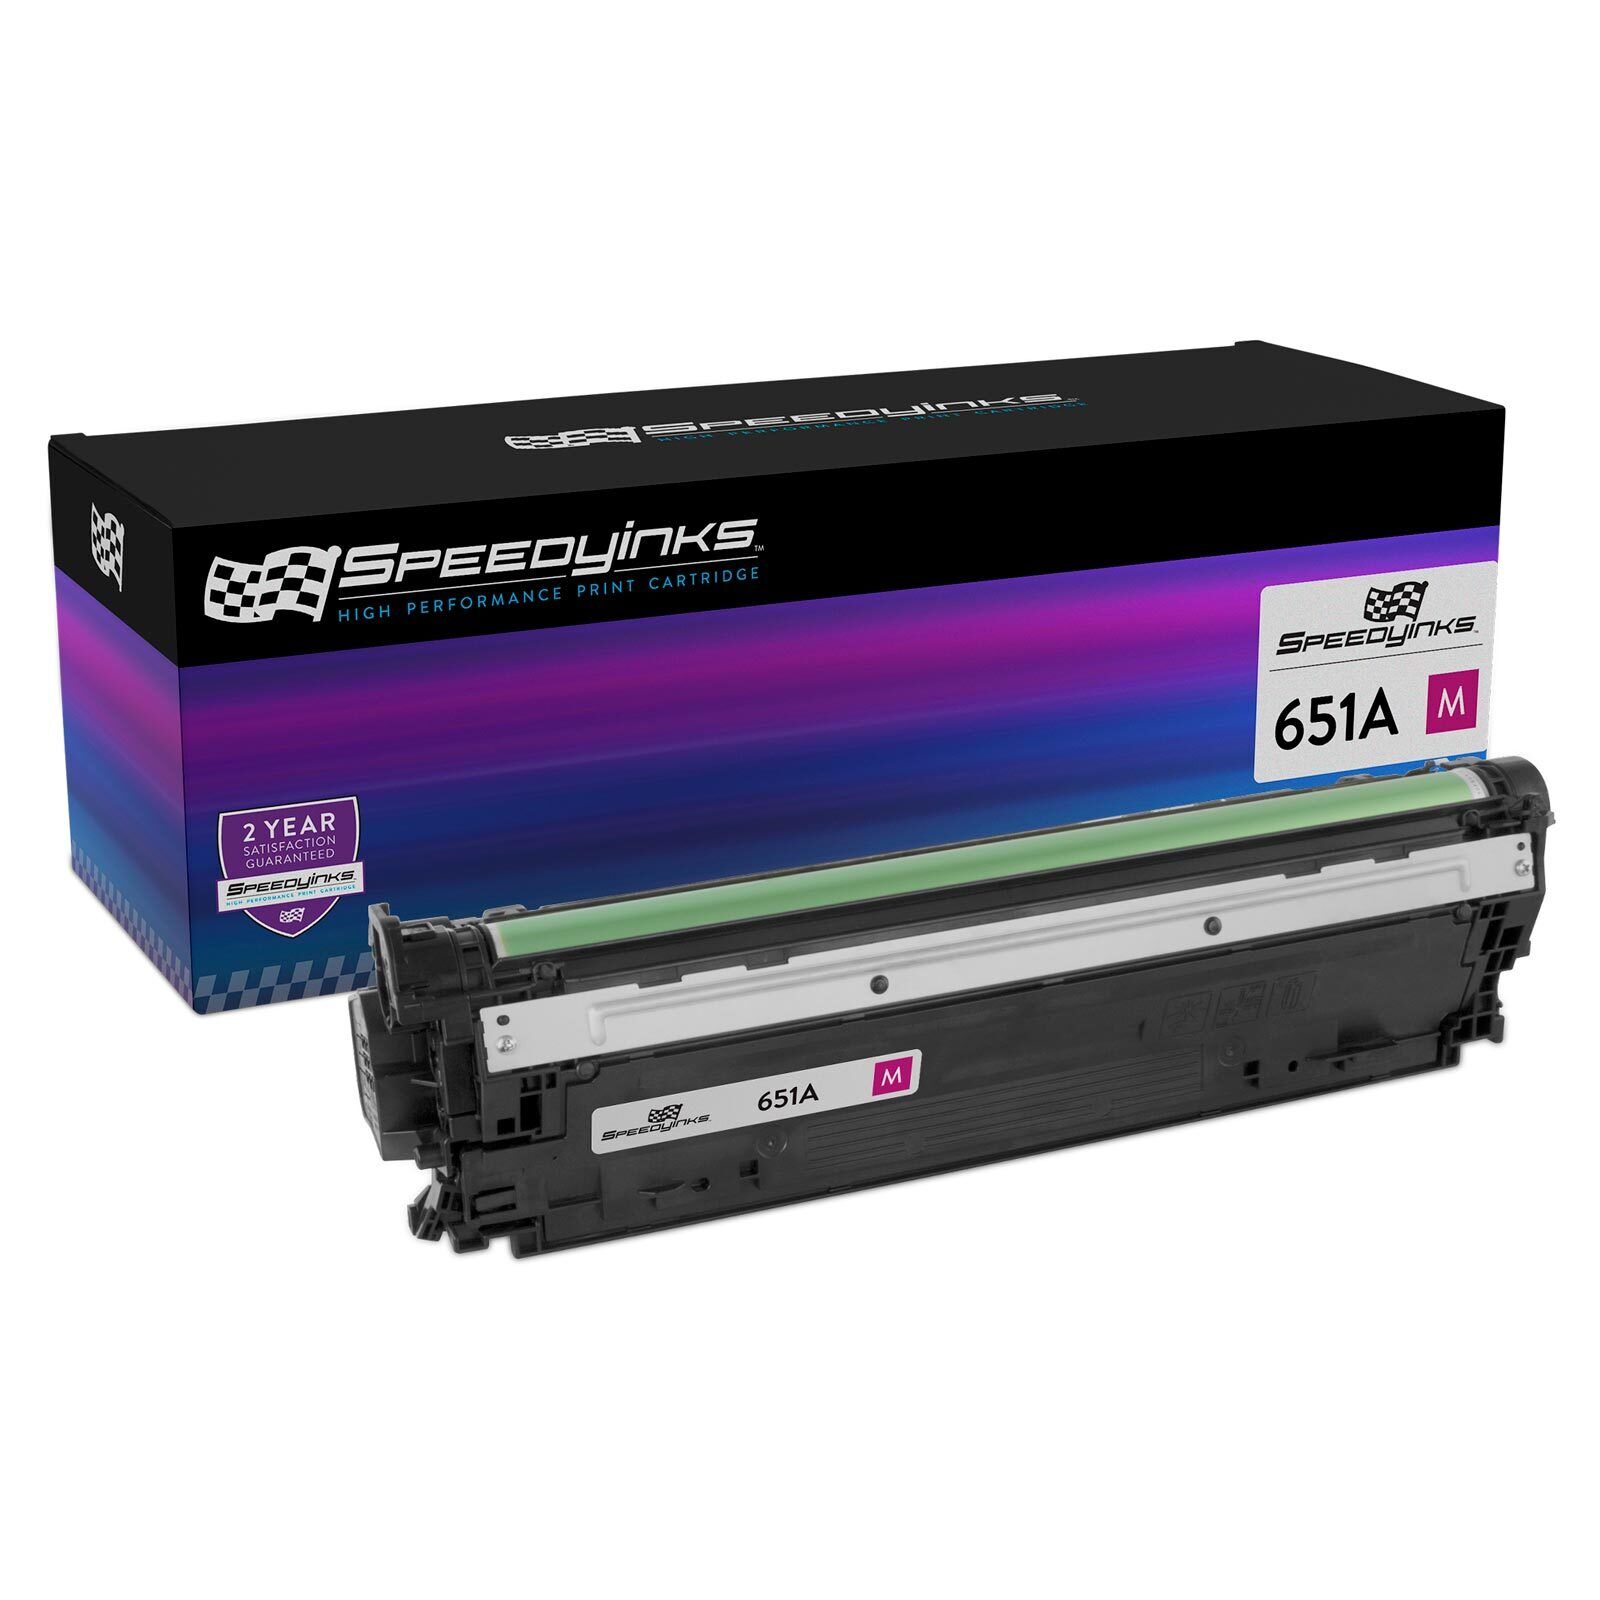 Reman Toner Cartridge for HP 651A Magenta, 16,000* Page Yield (CE343A)